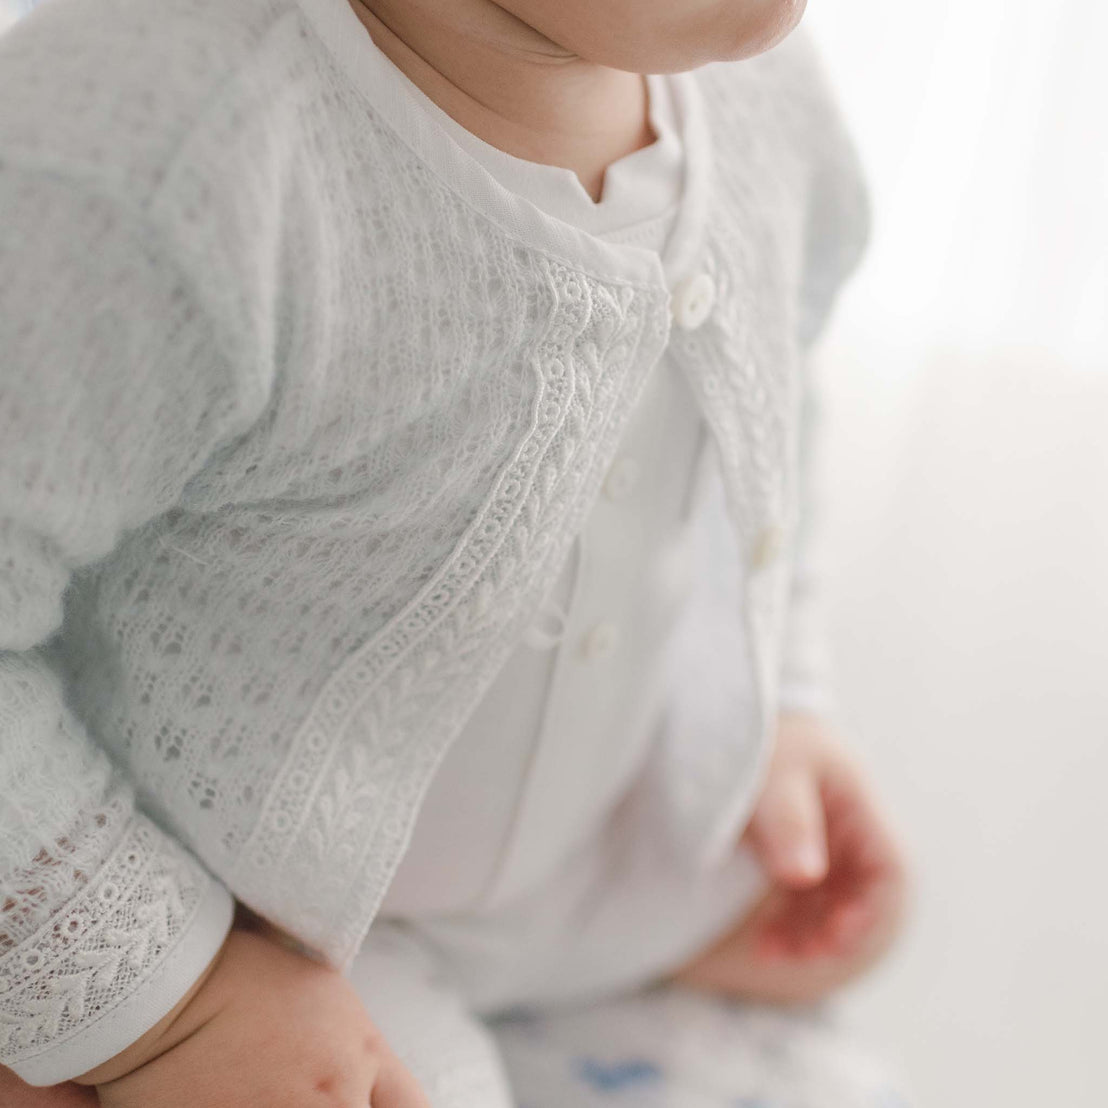 Close-up of a baby boy wearing the light blue Oliver Sweater Shorts Suit with white Venice lace trim, focusing on the details of the clothing and the baby's folded hands.